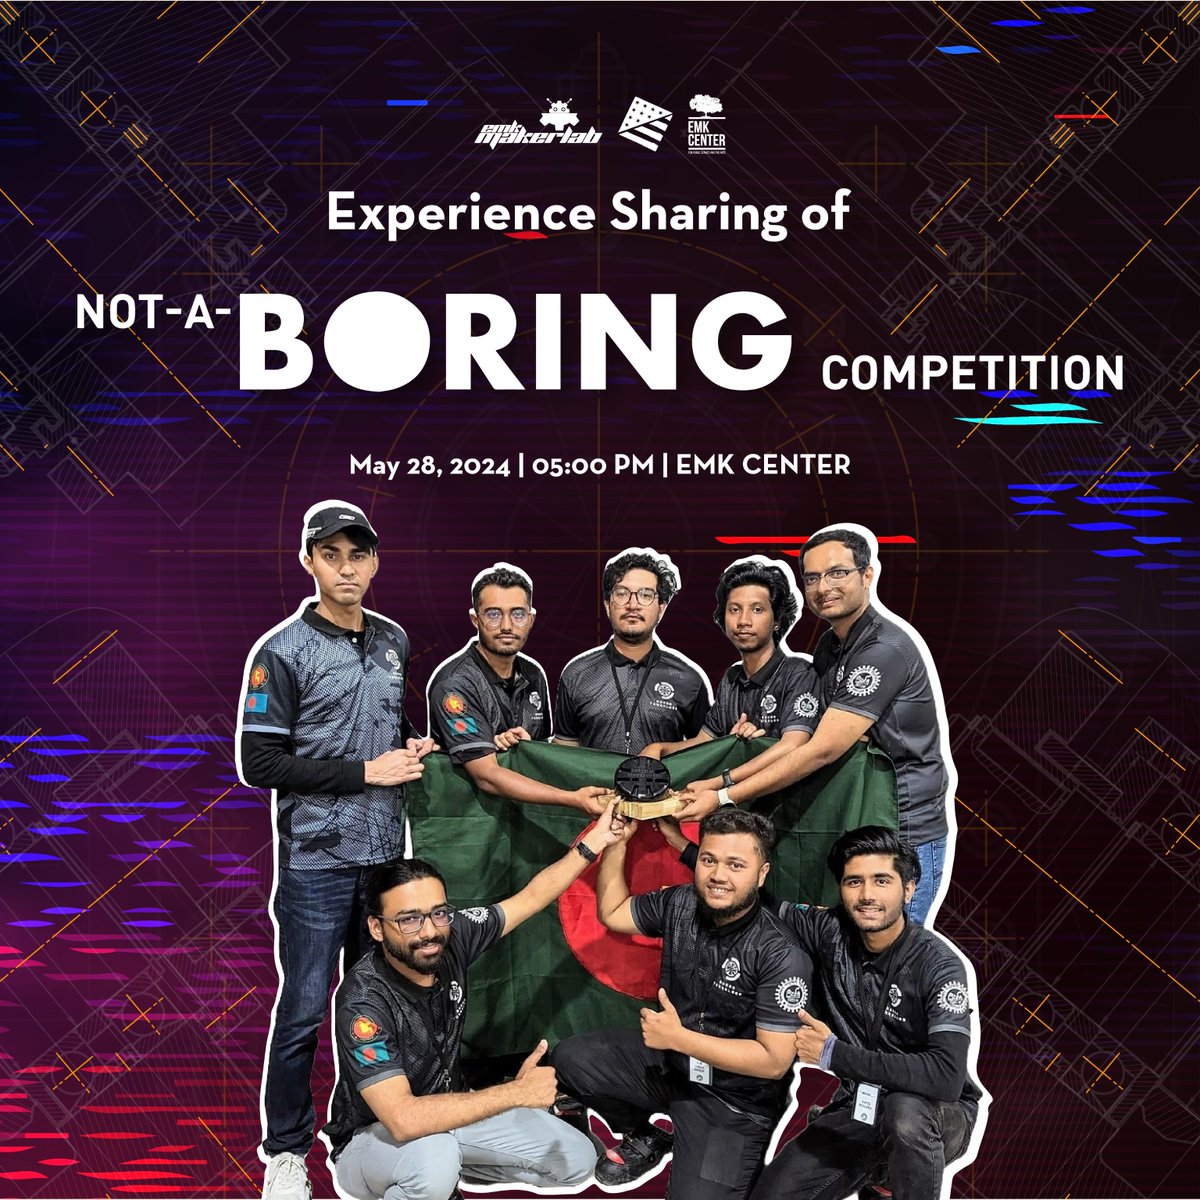 History has been made as Team 'Bored Tunnelers' punches their ticket to the finals of Elon Musk's 'Not-A-Boring Competition'! Don't miss their inspiring journey at EMK Center on May 28th at 5:00 PM. Register now: forms.gle/mnZLTLy1hAP3g1…

#emkcenter #amspaces #americanspaces